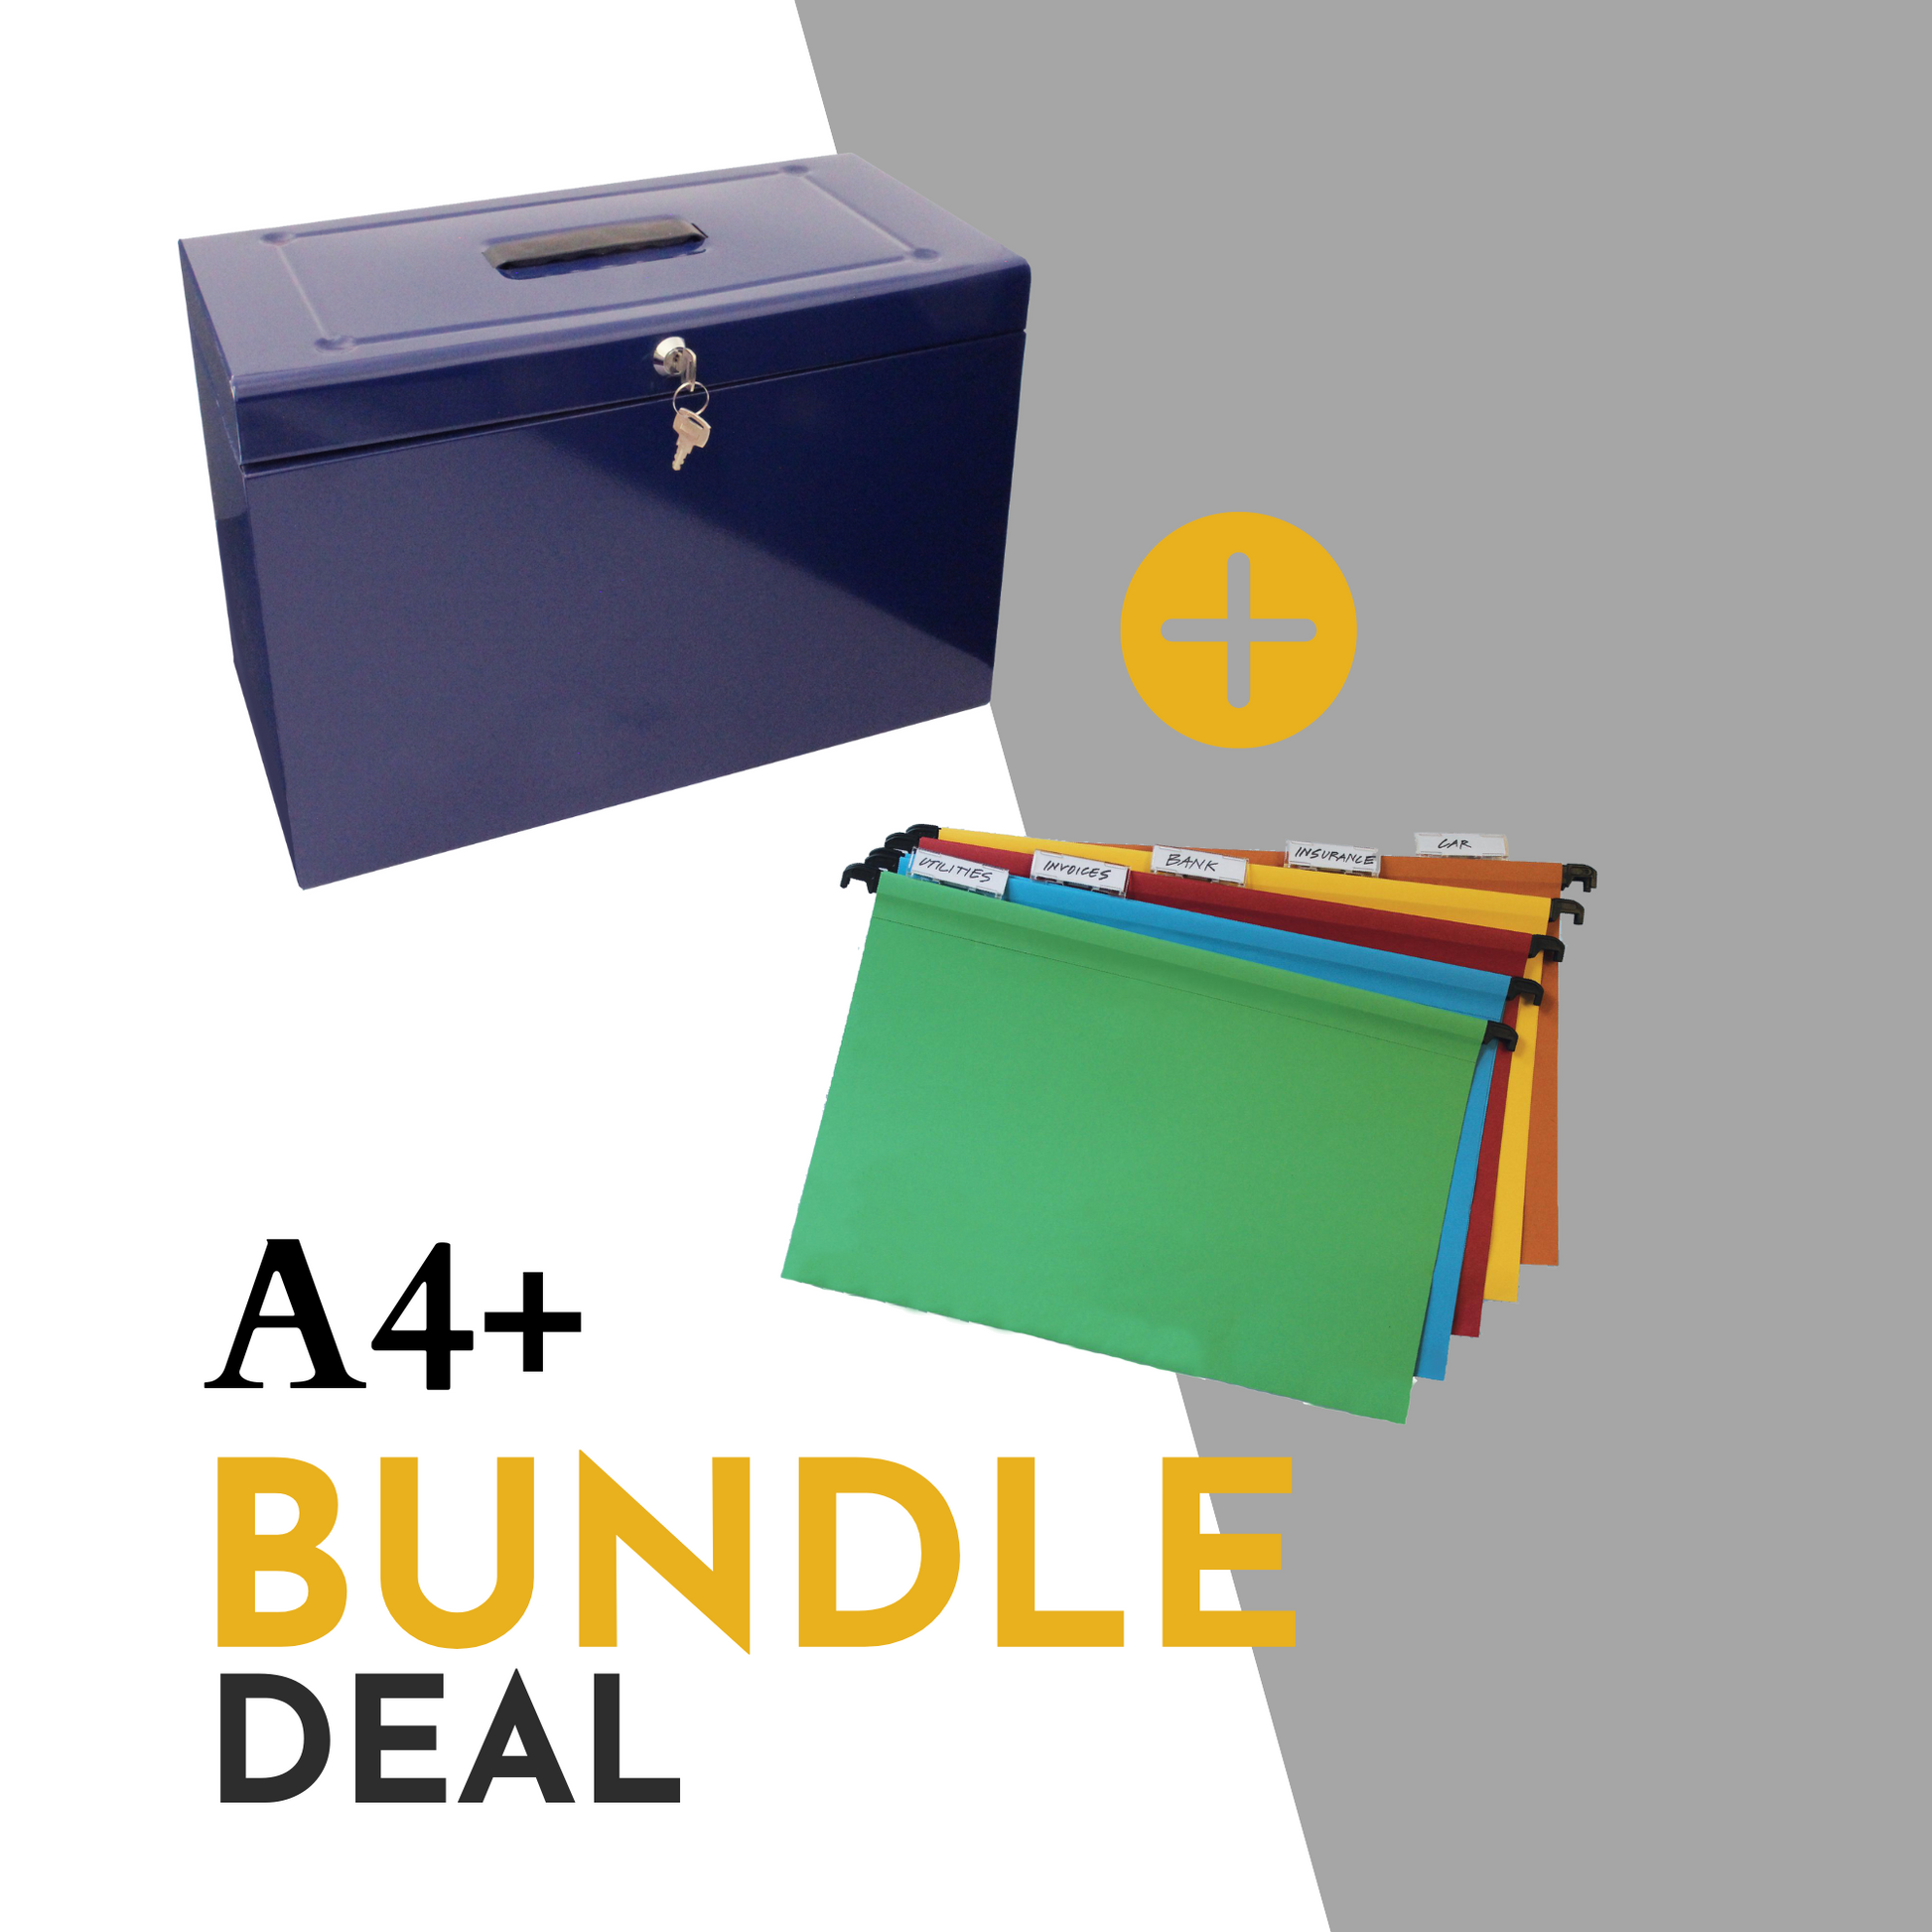 Promotional image for an A4+ (Foolscap Sized) file storage bundle deal, including a blue file box with a handle and key lock, plus an additional set of 10 assorted colour Foolscap suspension files with index tabs, showcasing an organized filing solution.